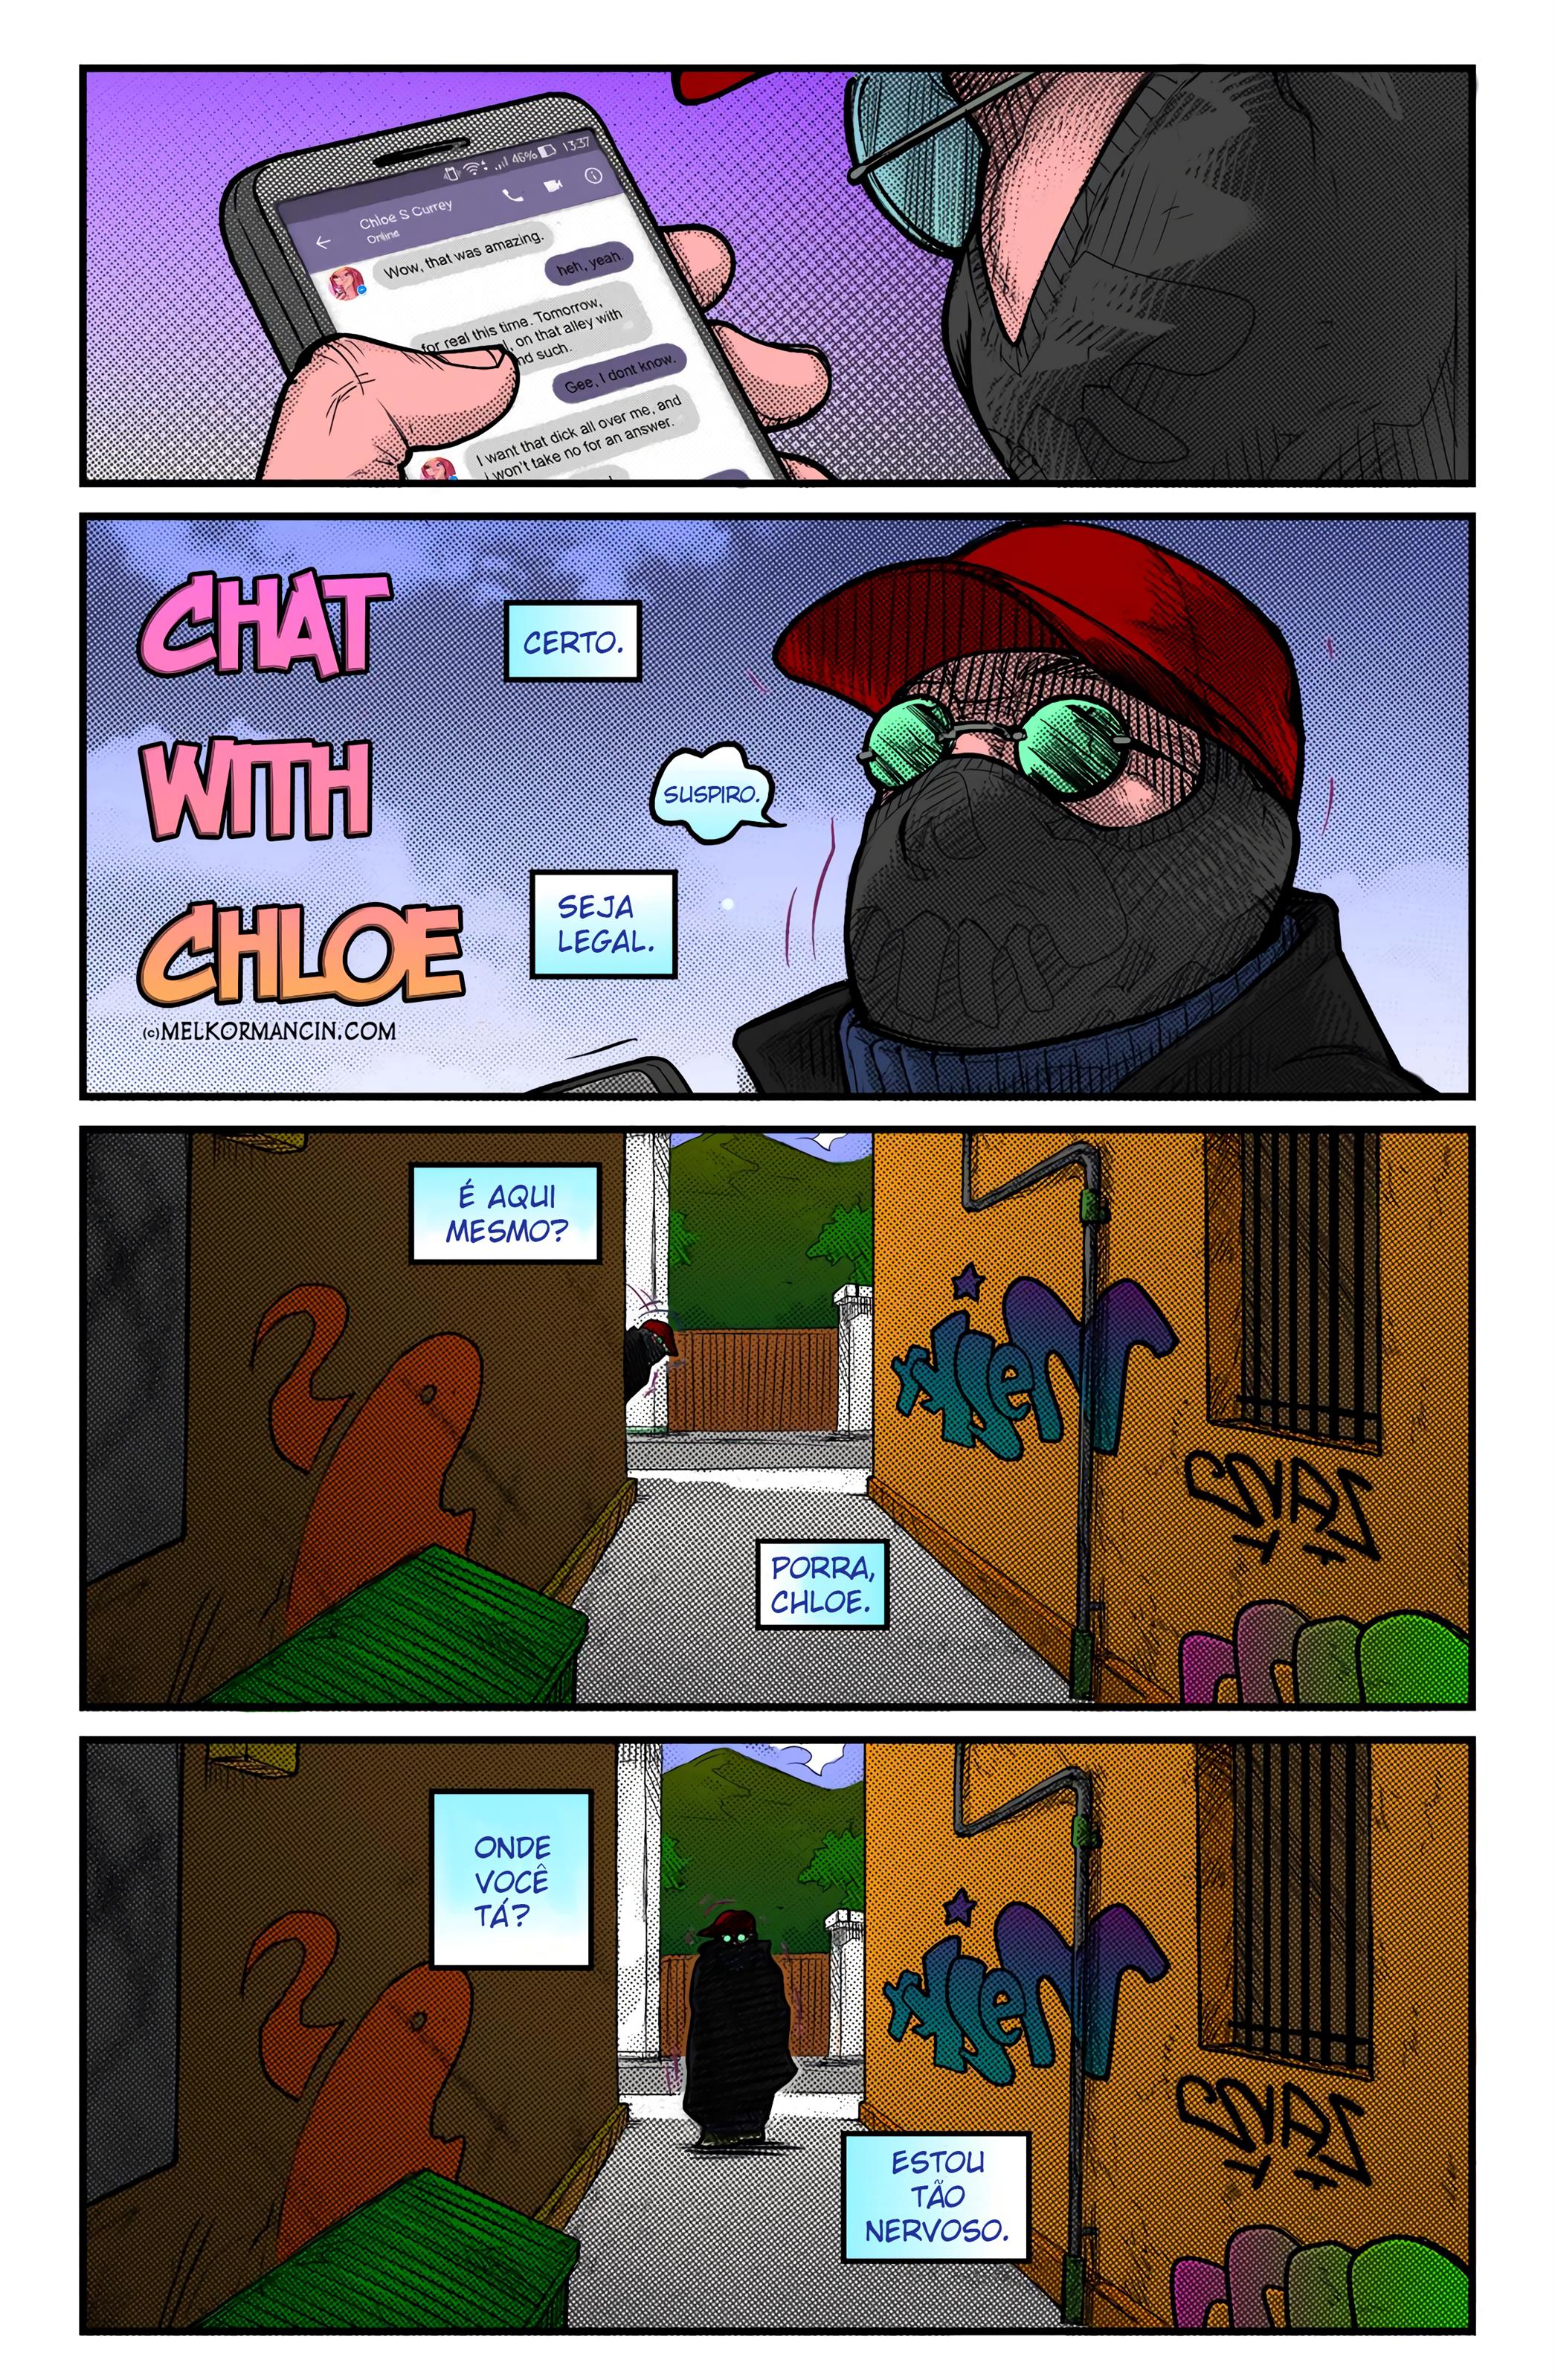 A Chat with Chloe